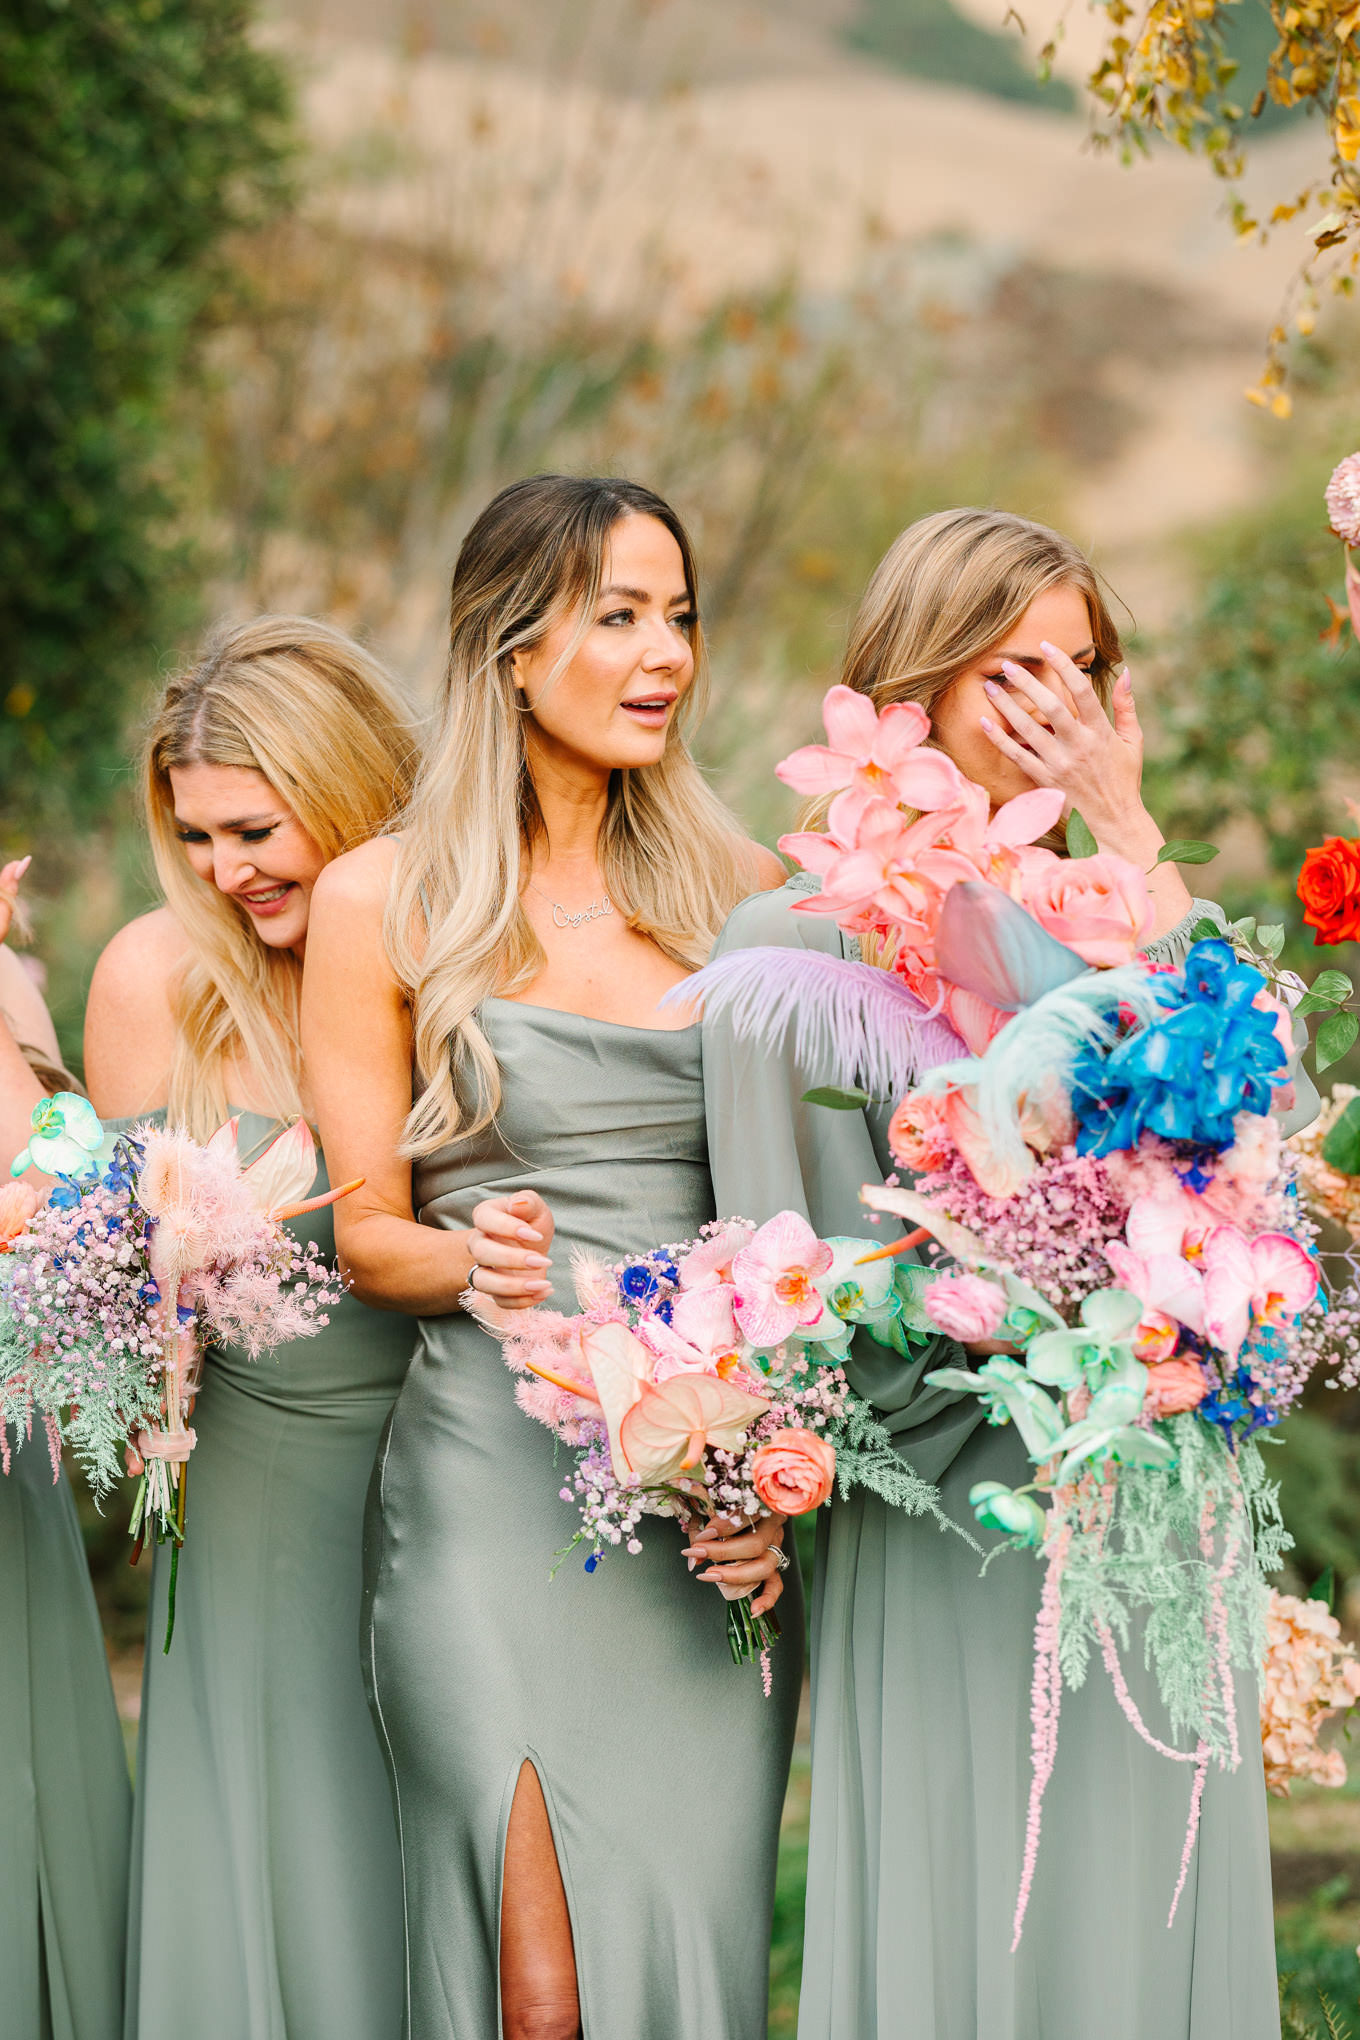 Bridesmaids crying during ceremony | Colorful and quirky wedding at Higuera Ranch in San Luis Obispo | #sanluisobispowedding #californiawedding #higueraranch #madonnainn   Source: Mary Costa Photography | Los Angeles